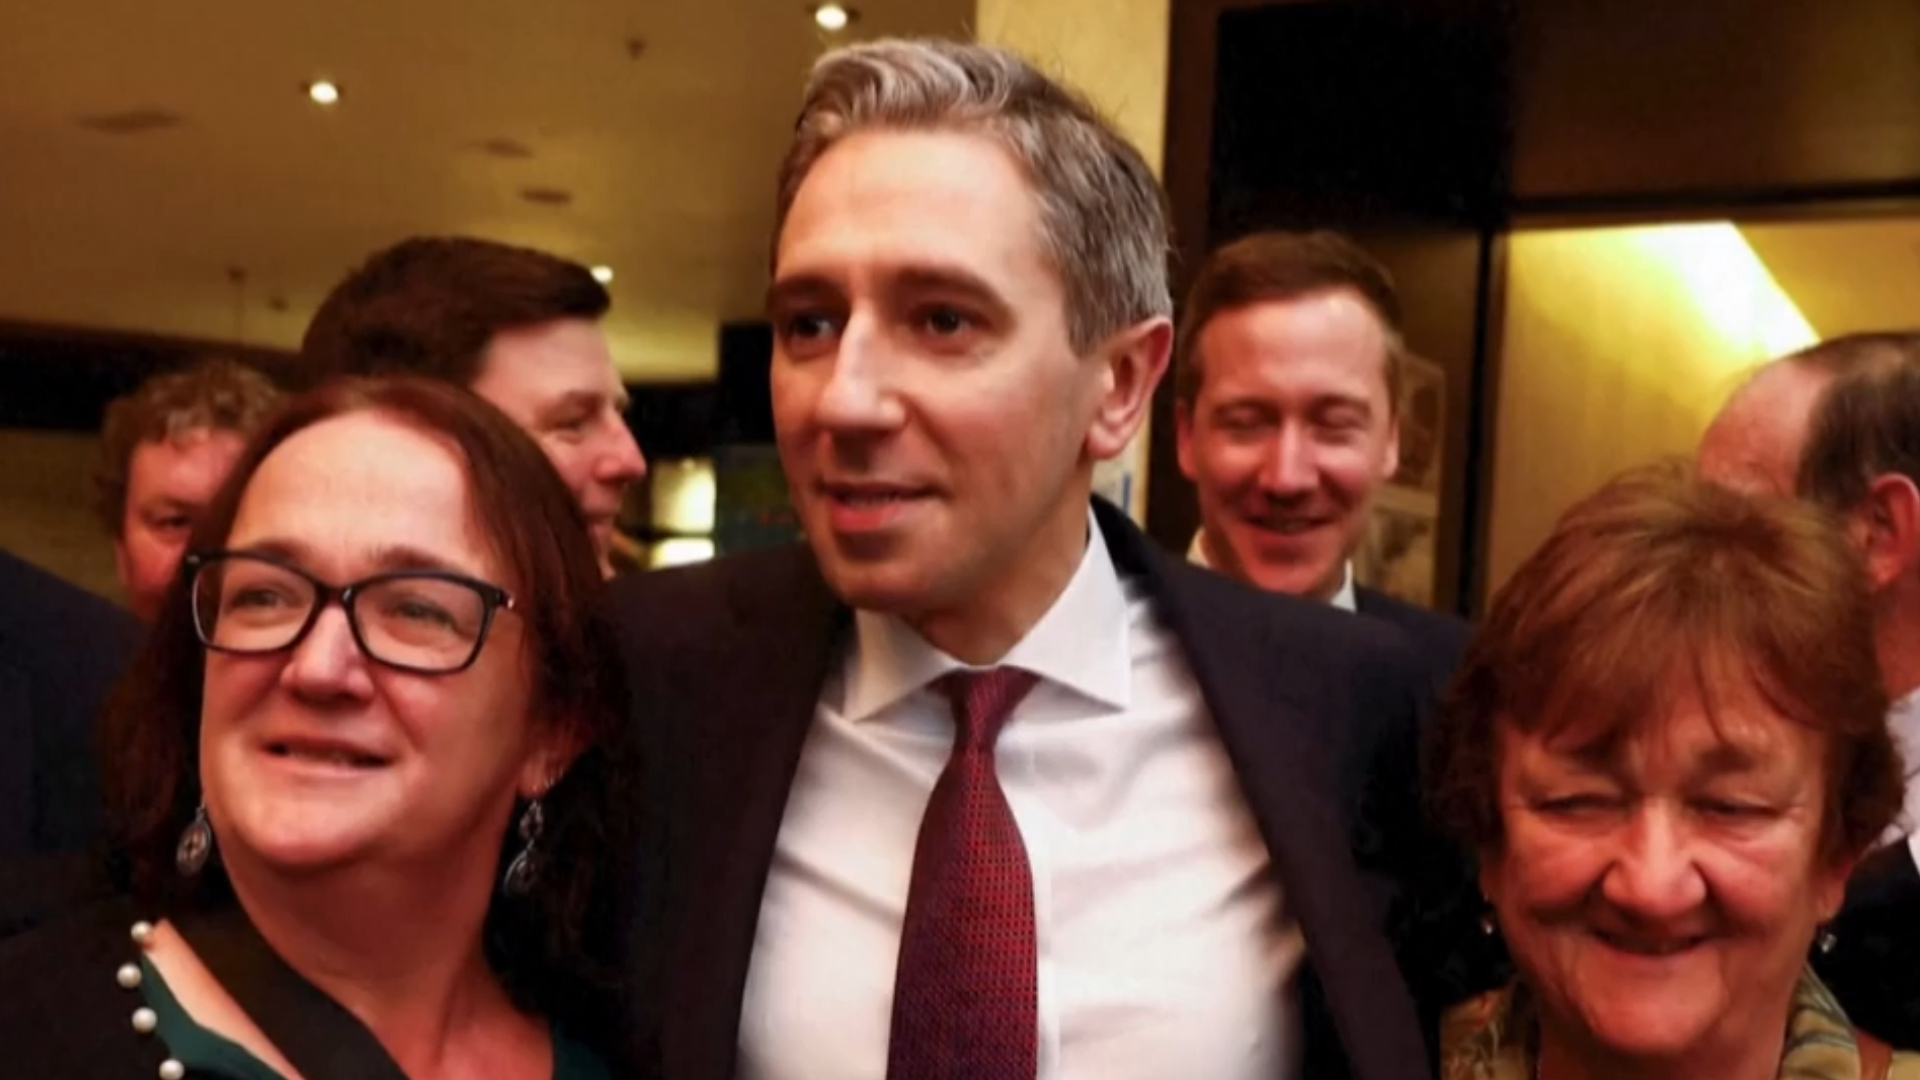 Simon Harris becomes Ireland's youngest-ever Prime Minister at 37